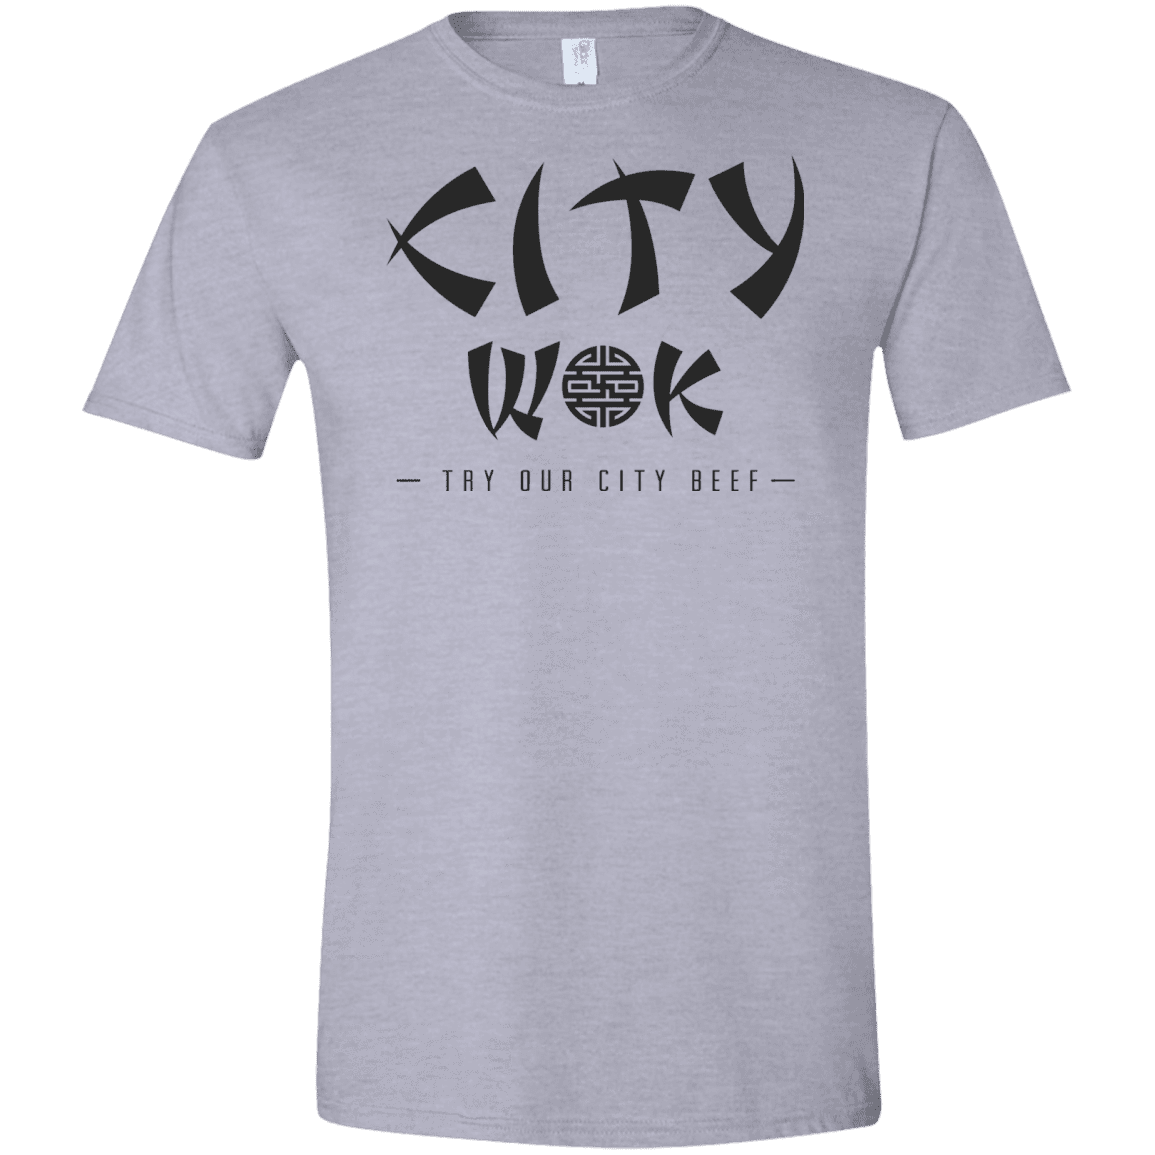 T-Shirts Sport Grey / X-Small City Wok Men's Semi-Fitted Softstyle